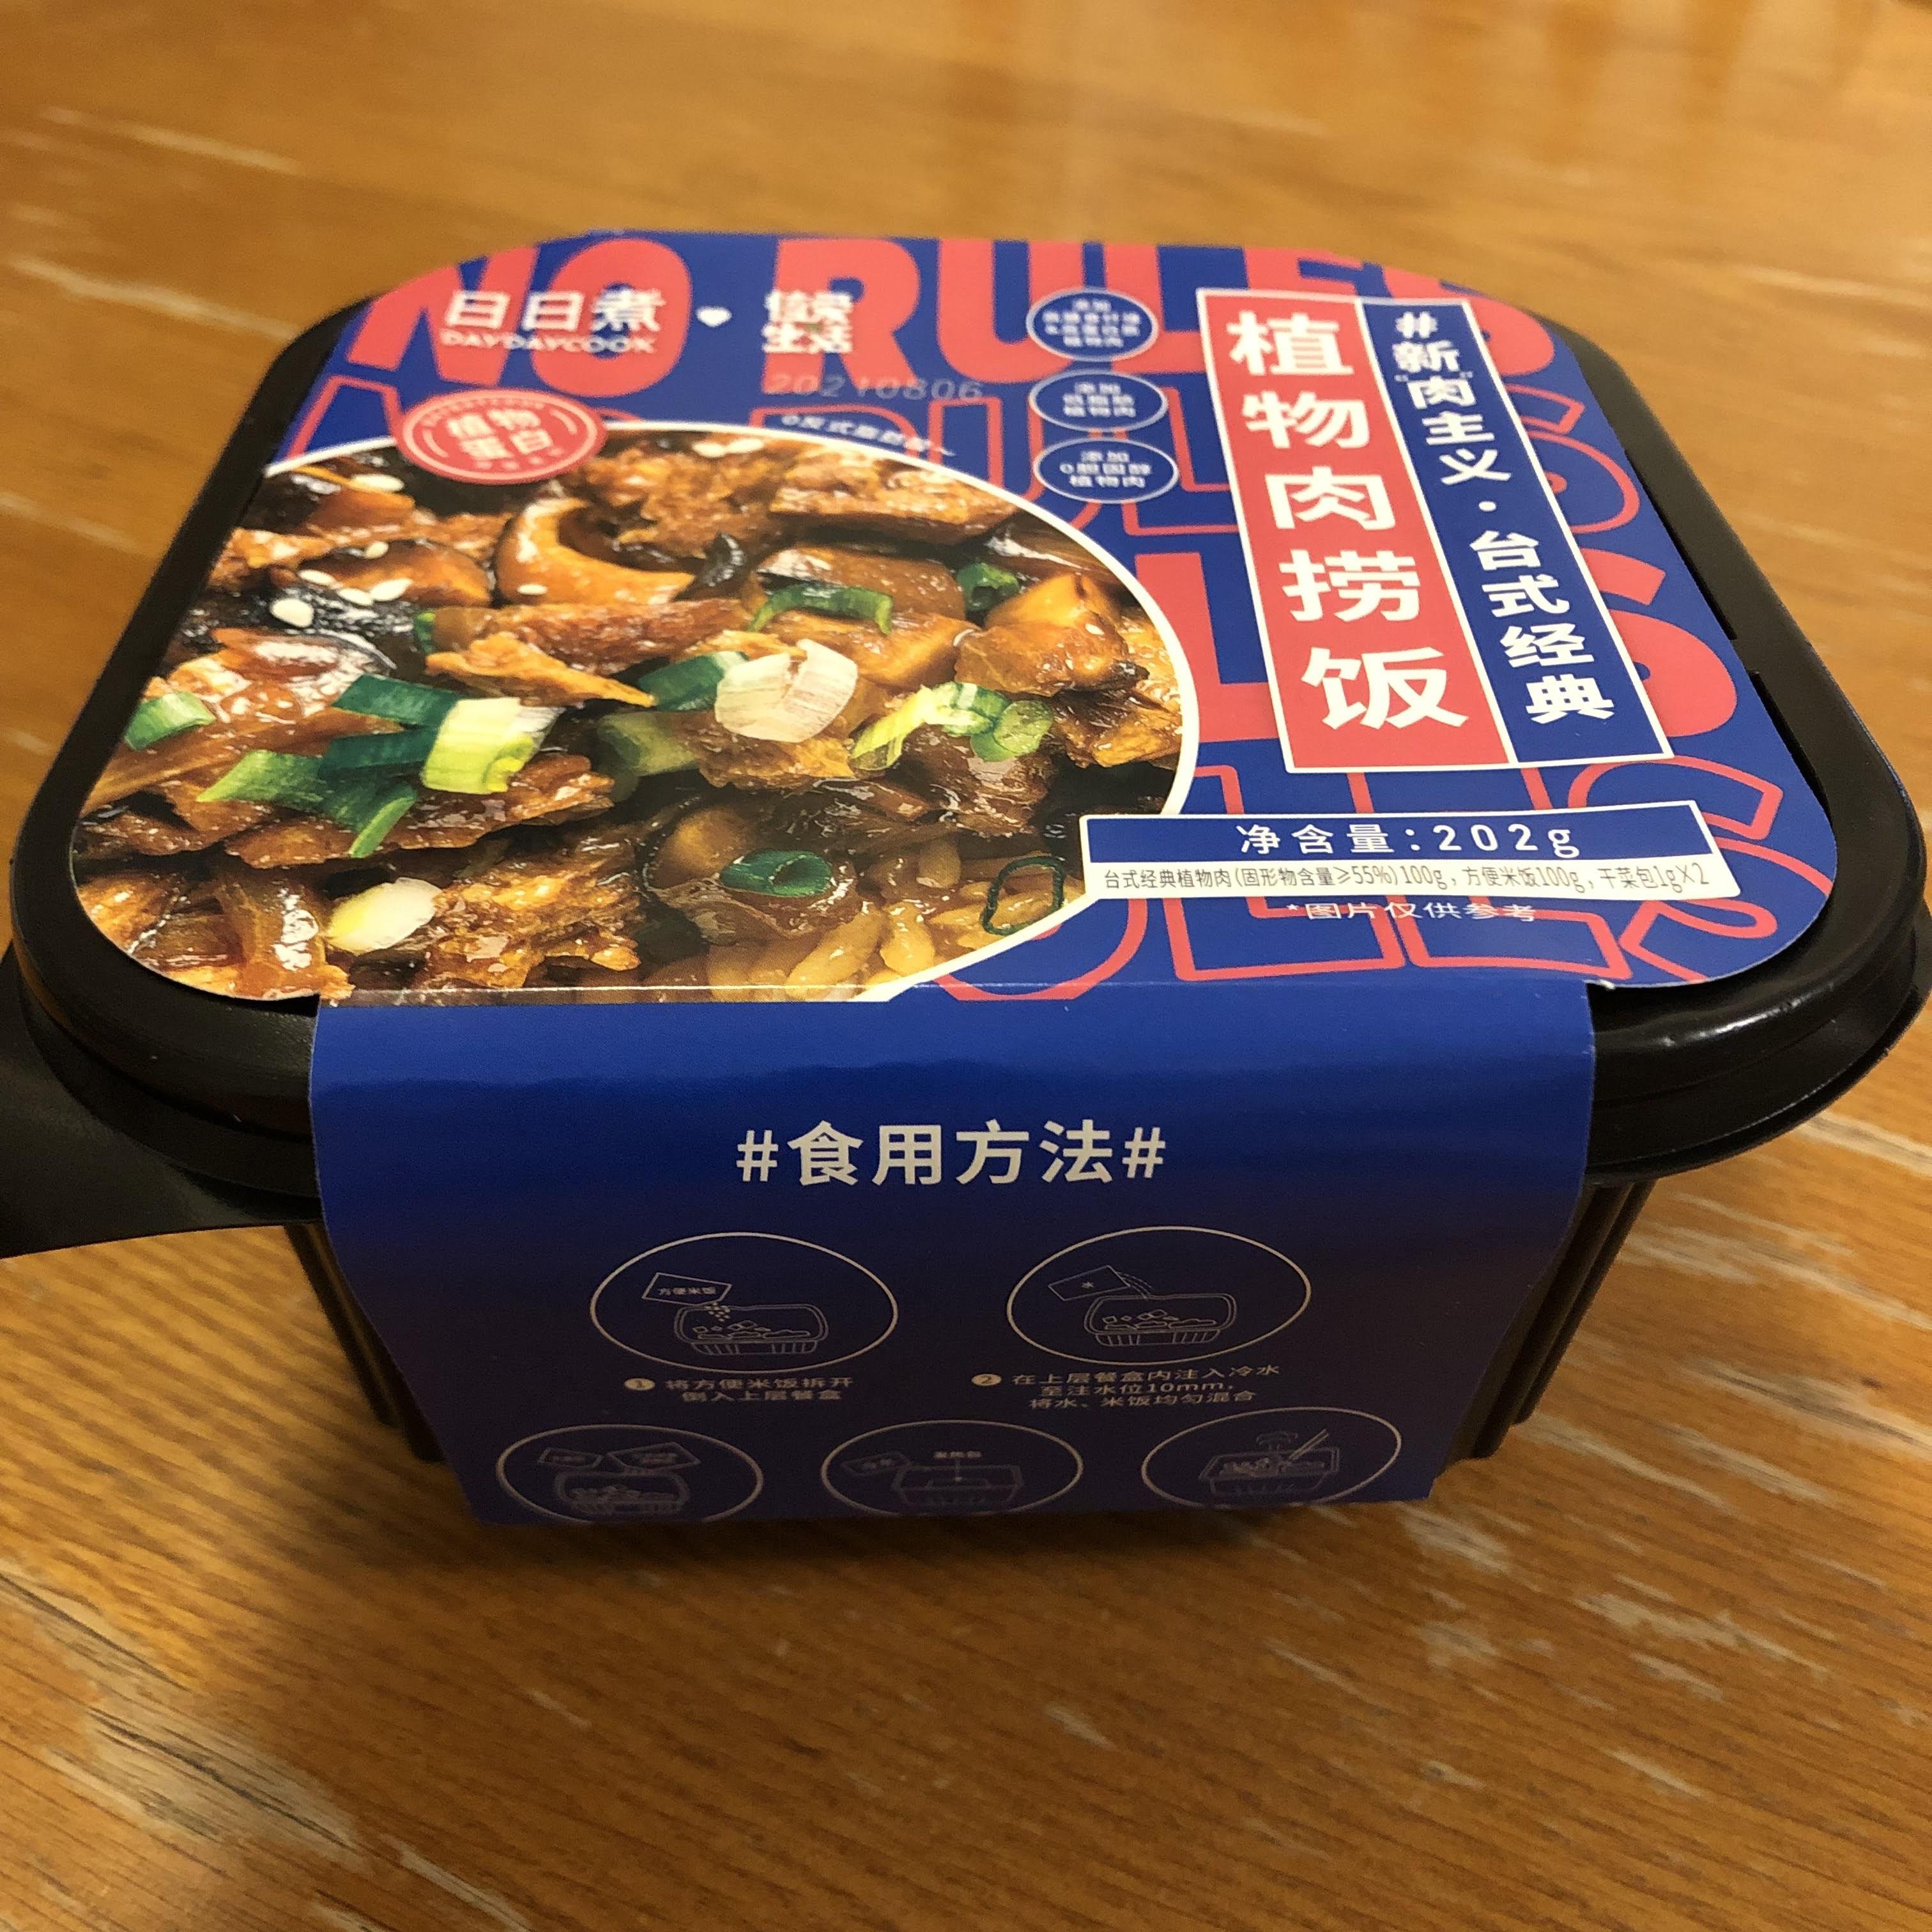 DAY DAY COOK Self Heating Soybean Rice Bowl Review